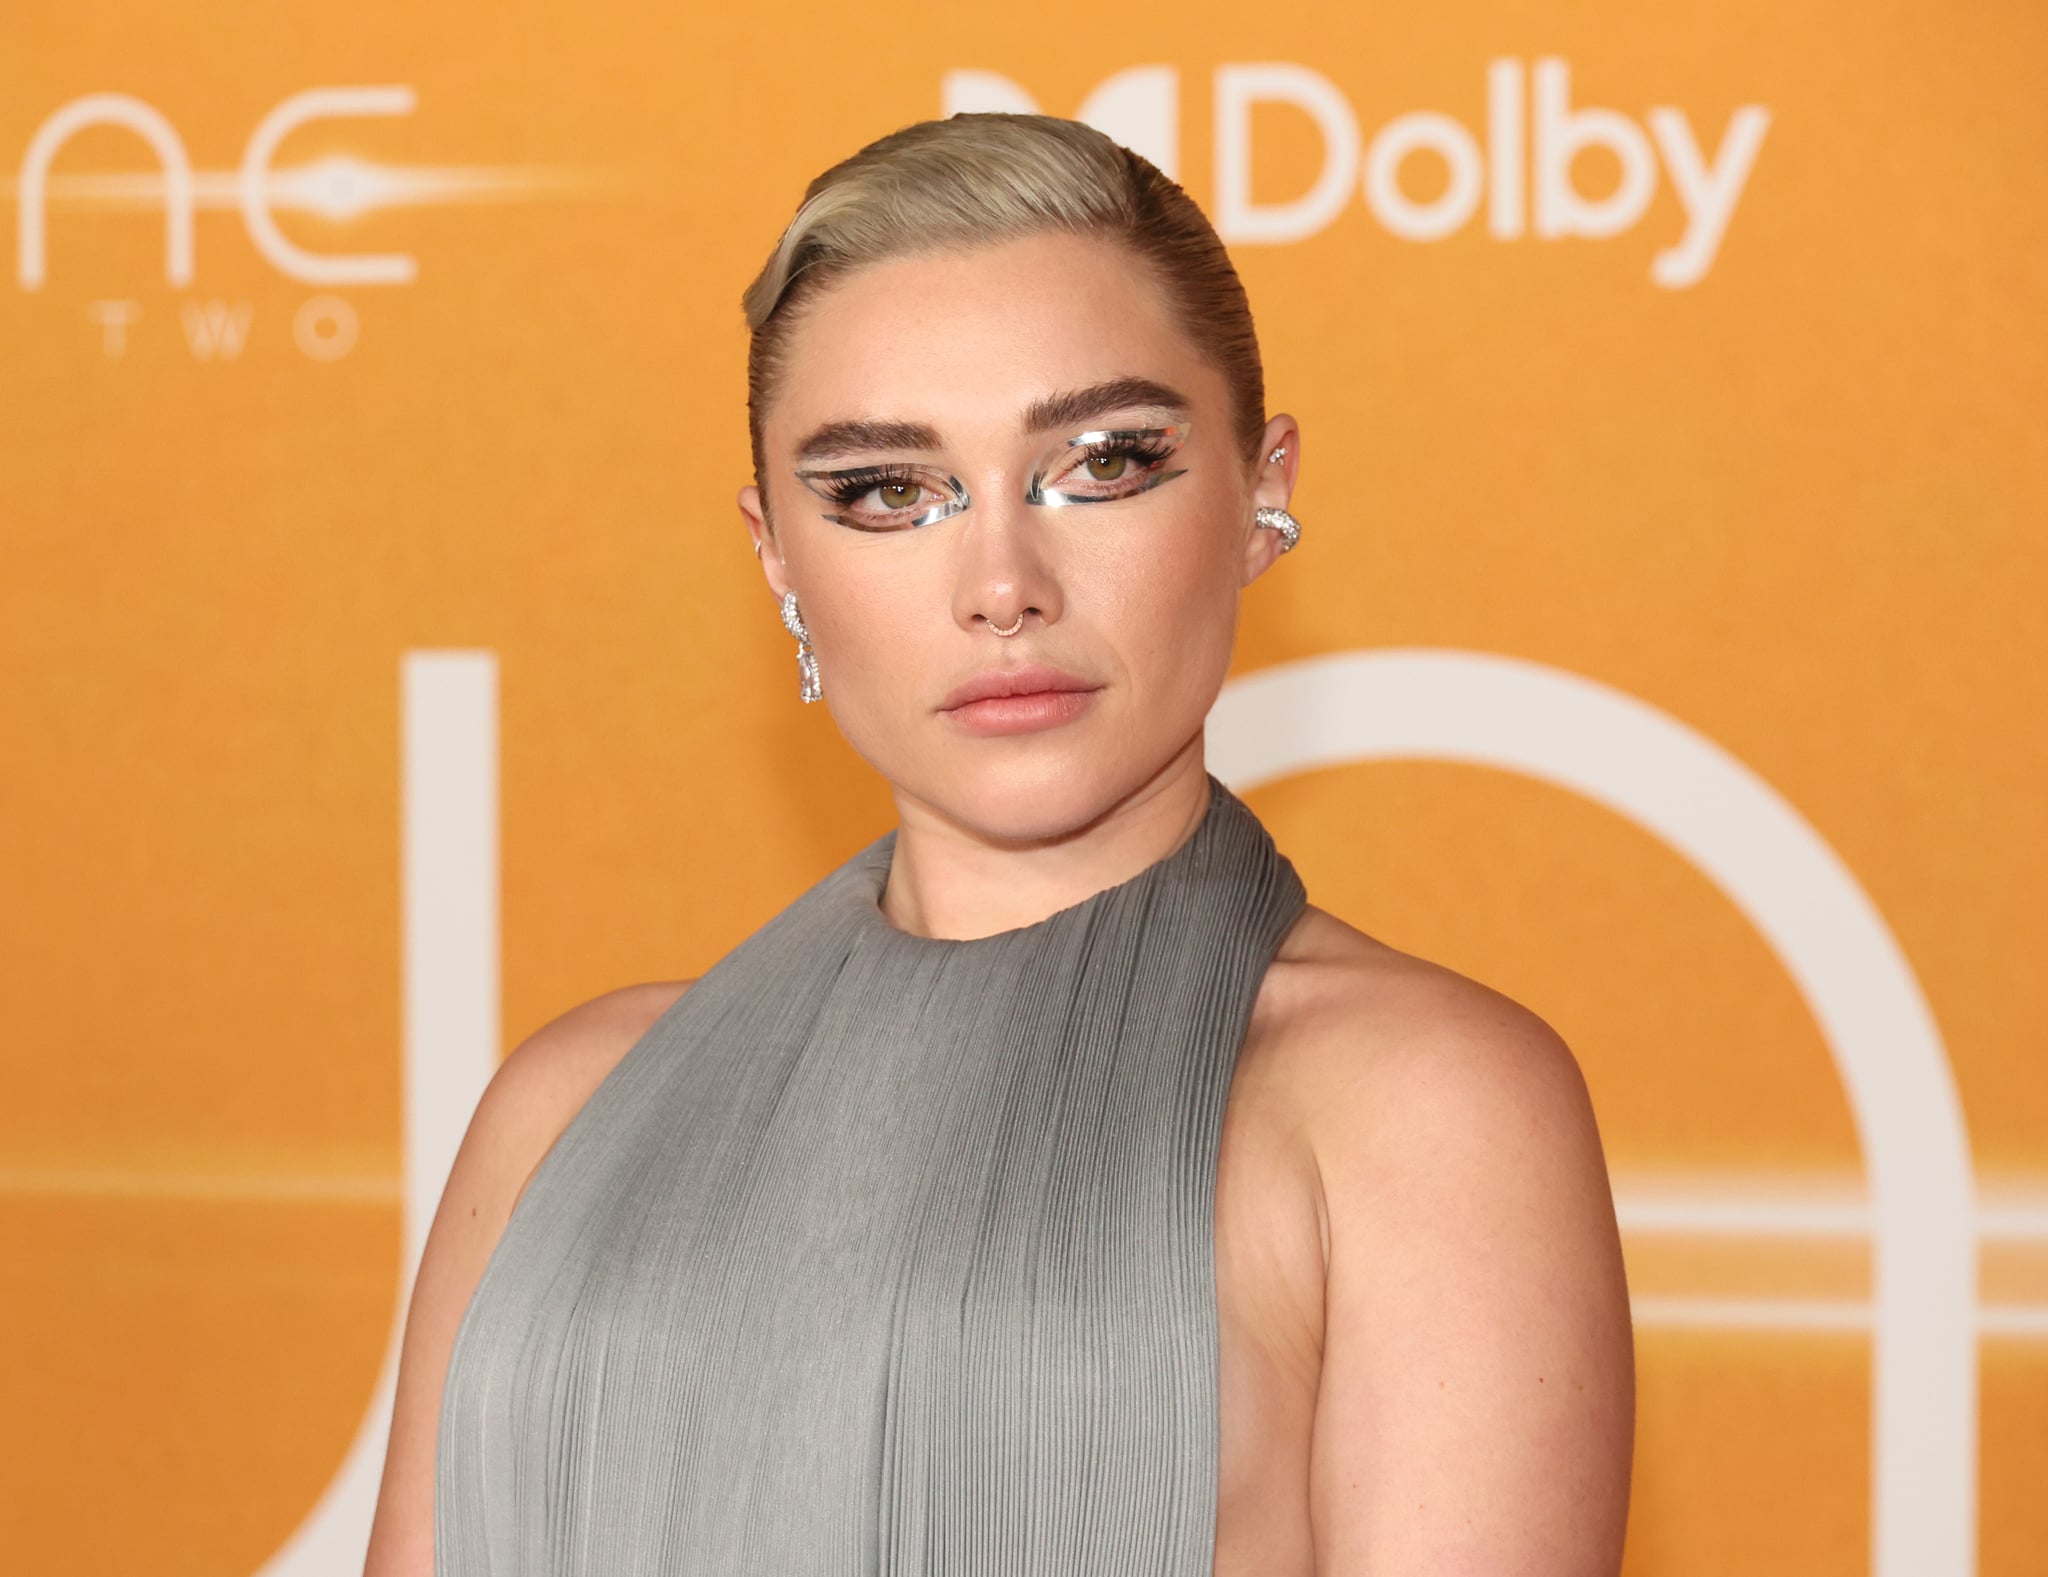 NEW YORK, NEW YORK - FEBRUARY 25: Florence Pugh attends the 